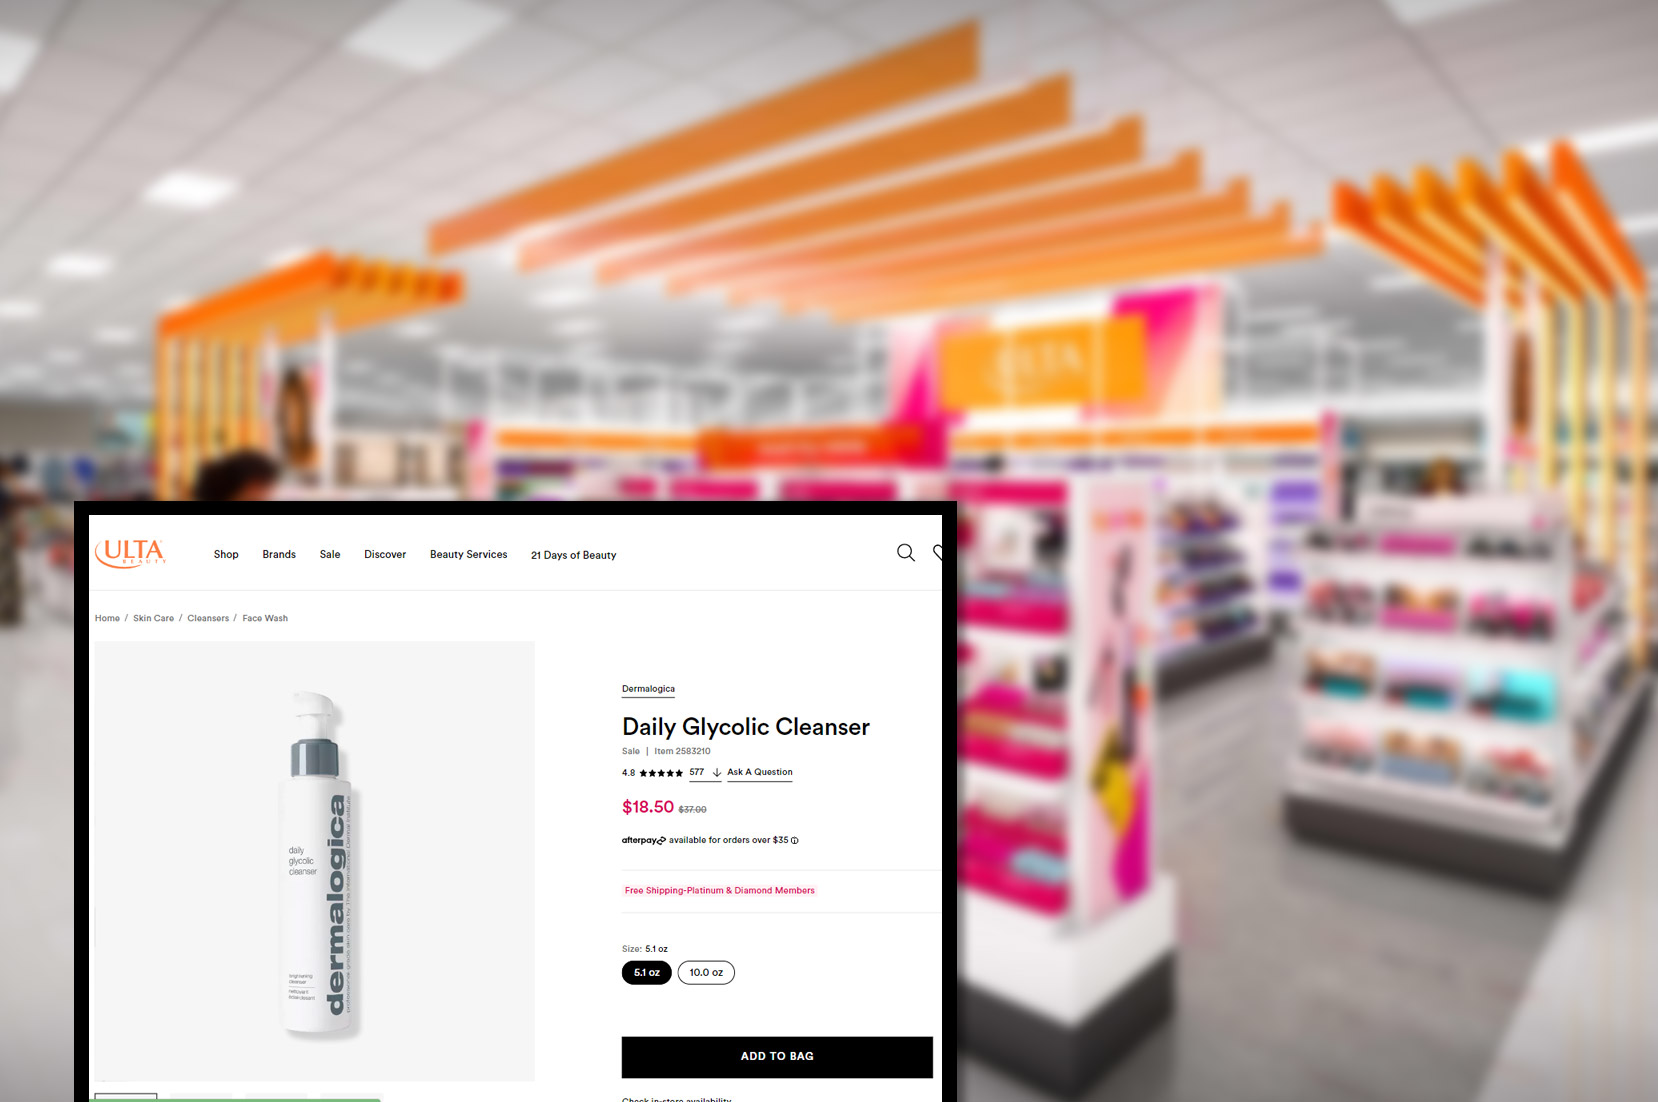 ulta-comproduct-pricing-information-and-image-scraping-services